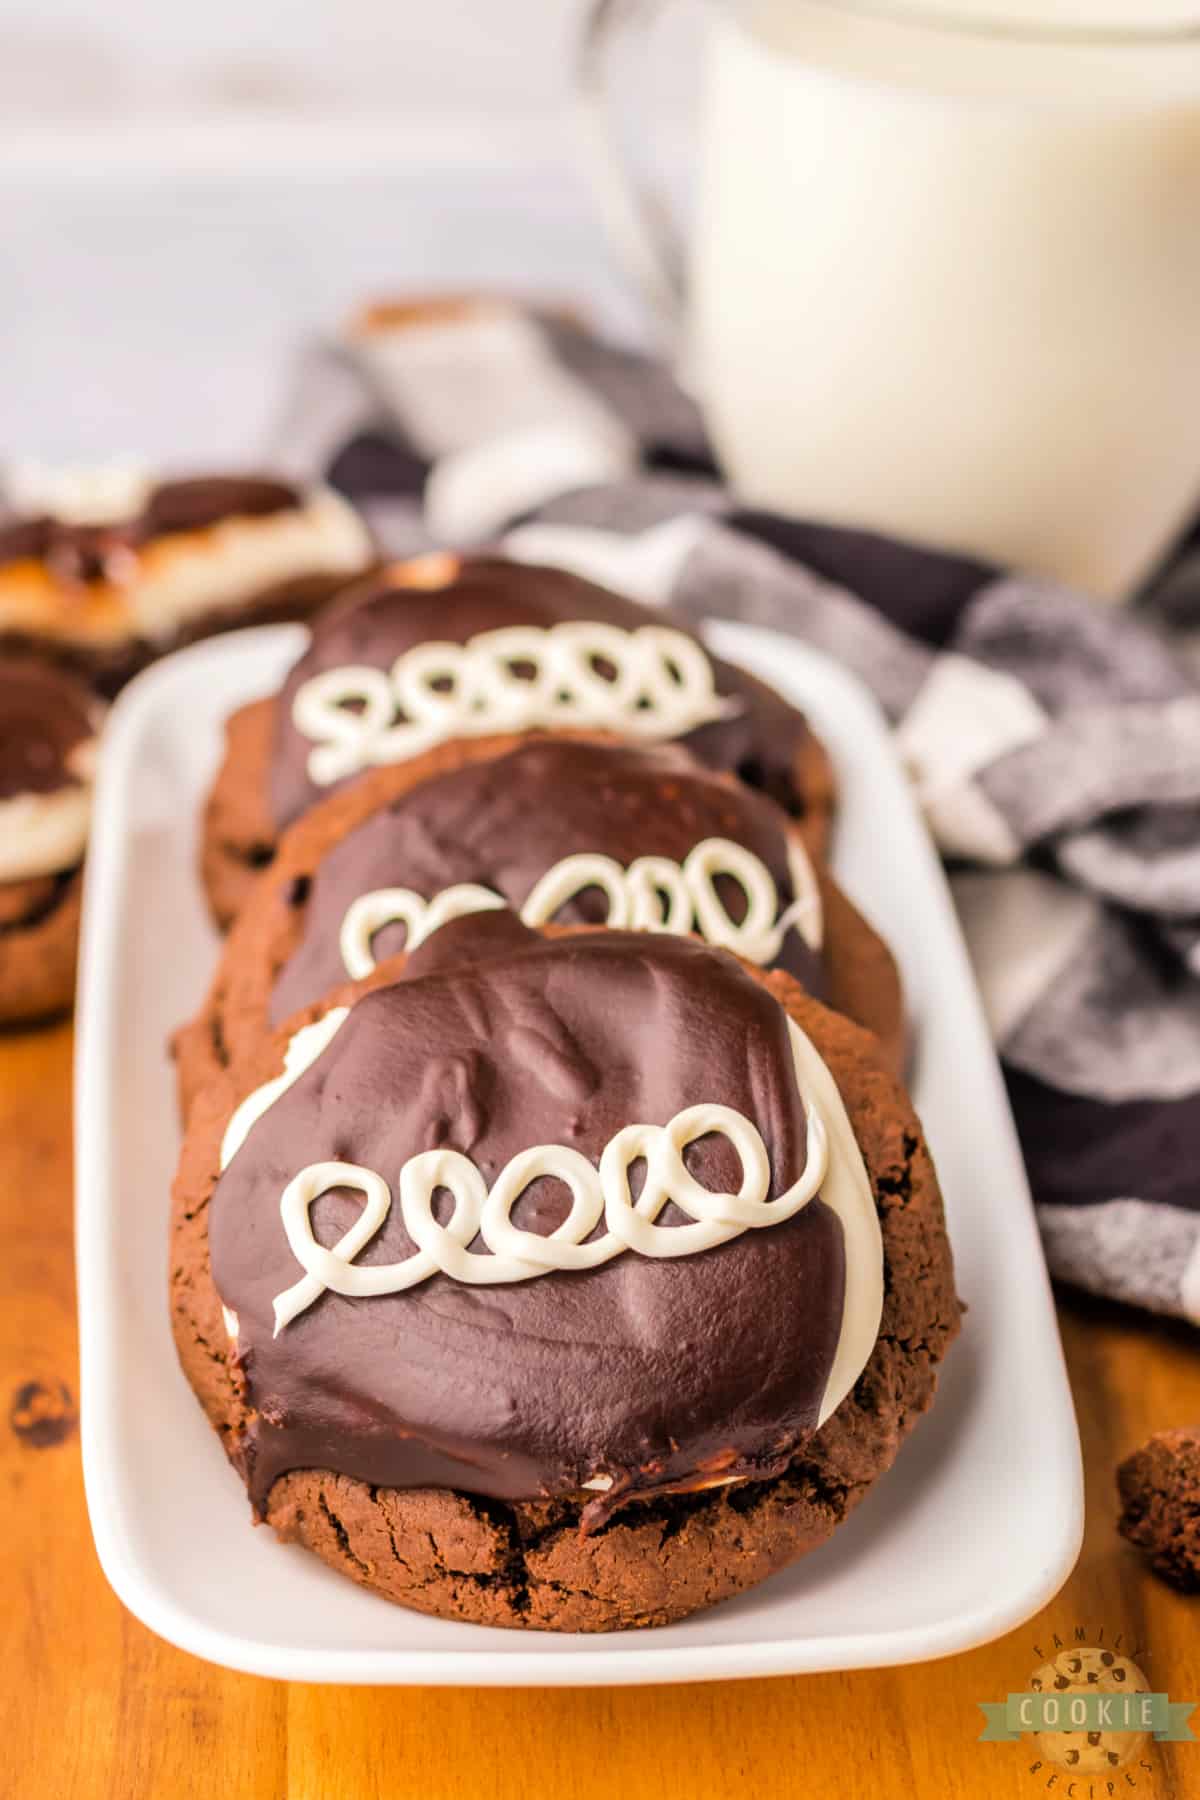 Chocolate cookies frosted with marshmallow buttercream and chocolate ganache